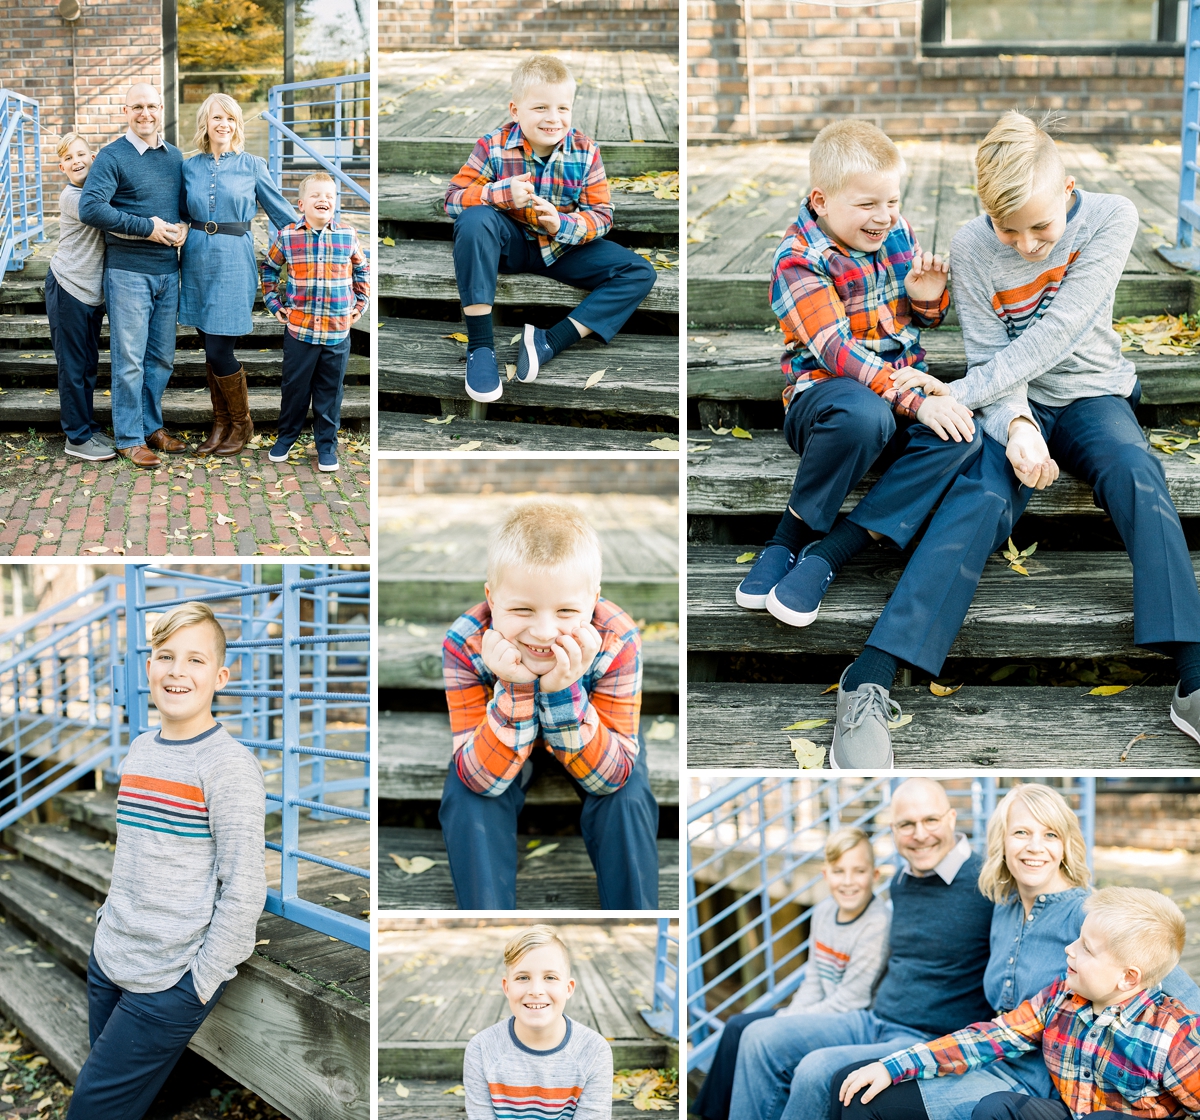 Minneapolis Family Photos in St. Anthony Main. Happy Family smiling in lifestyle photography in Minneapolis.